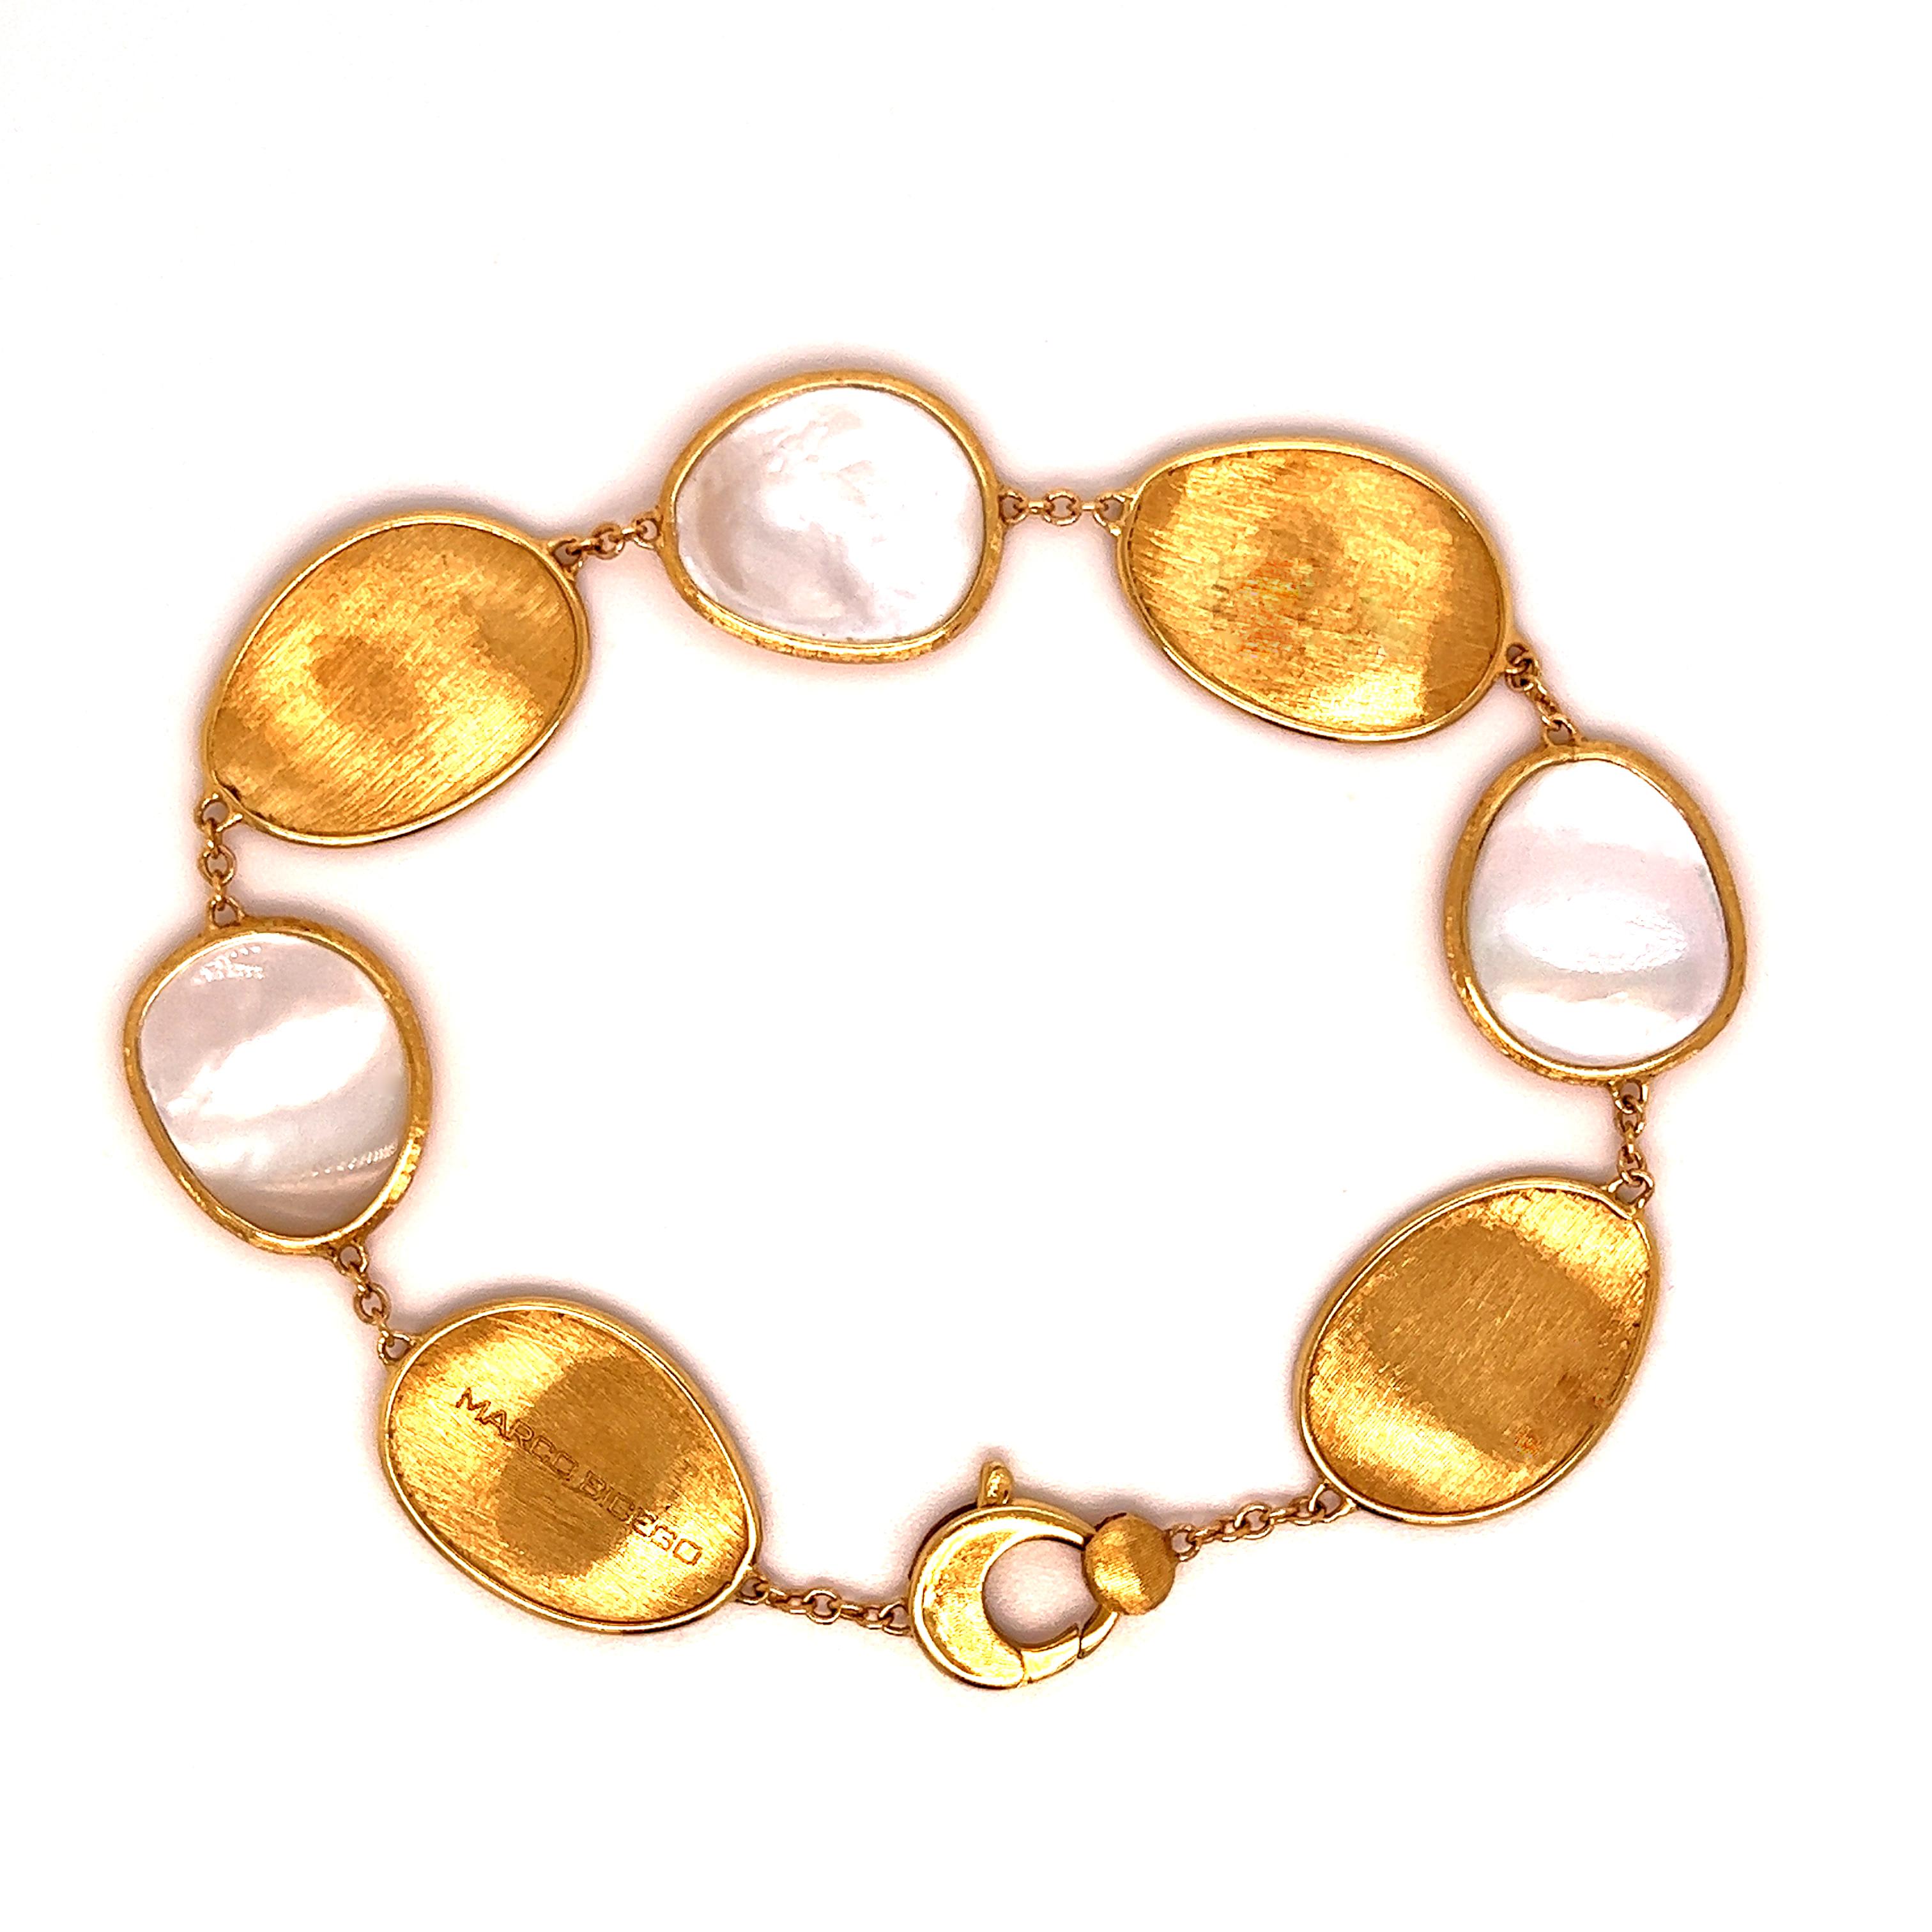 Mixed Cut MarCo Bicego Lunaria Collection 18k Yellow Gold White Mother of Pearl Bracelet